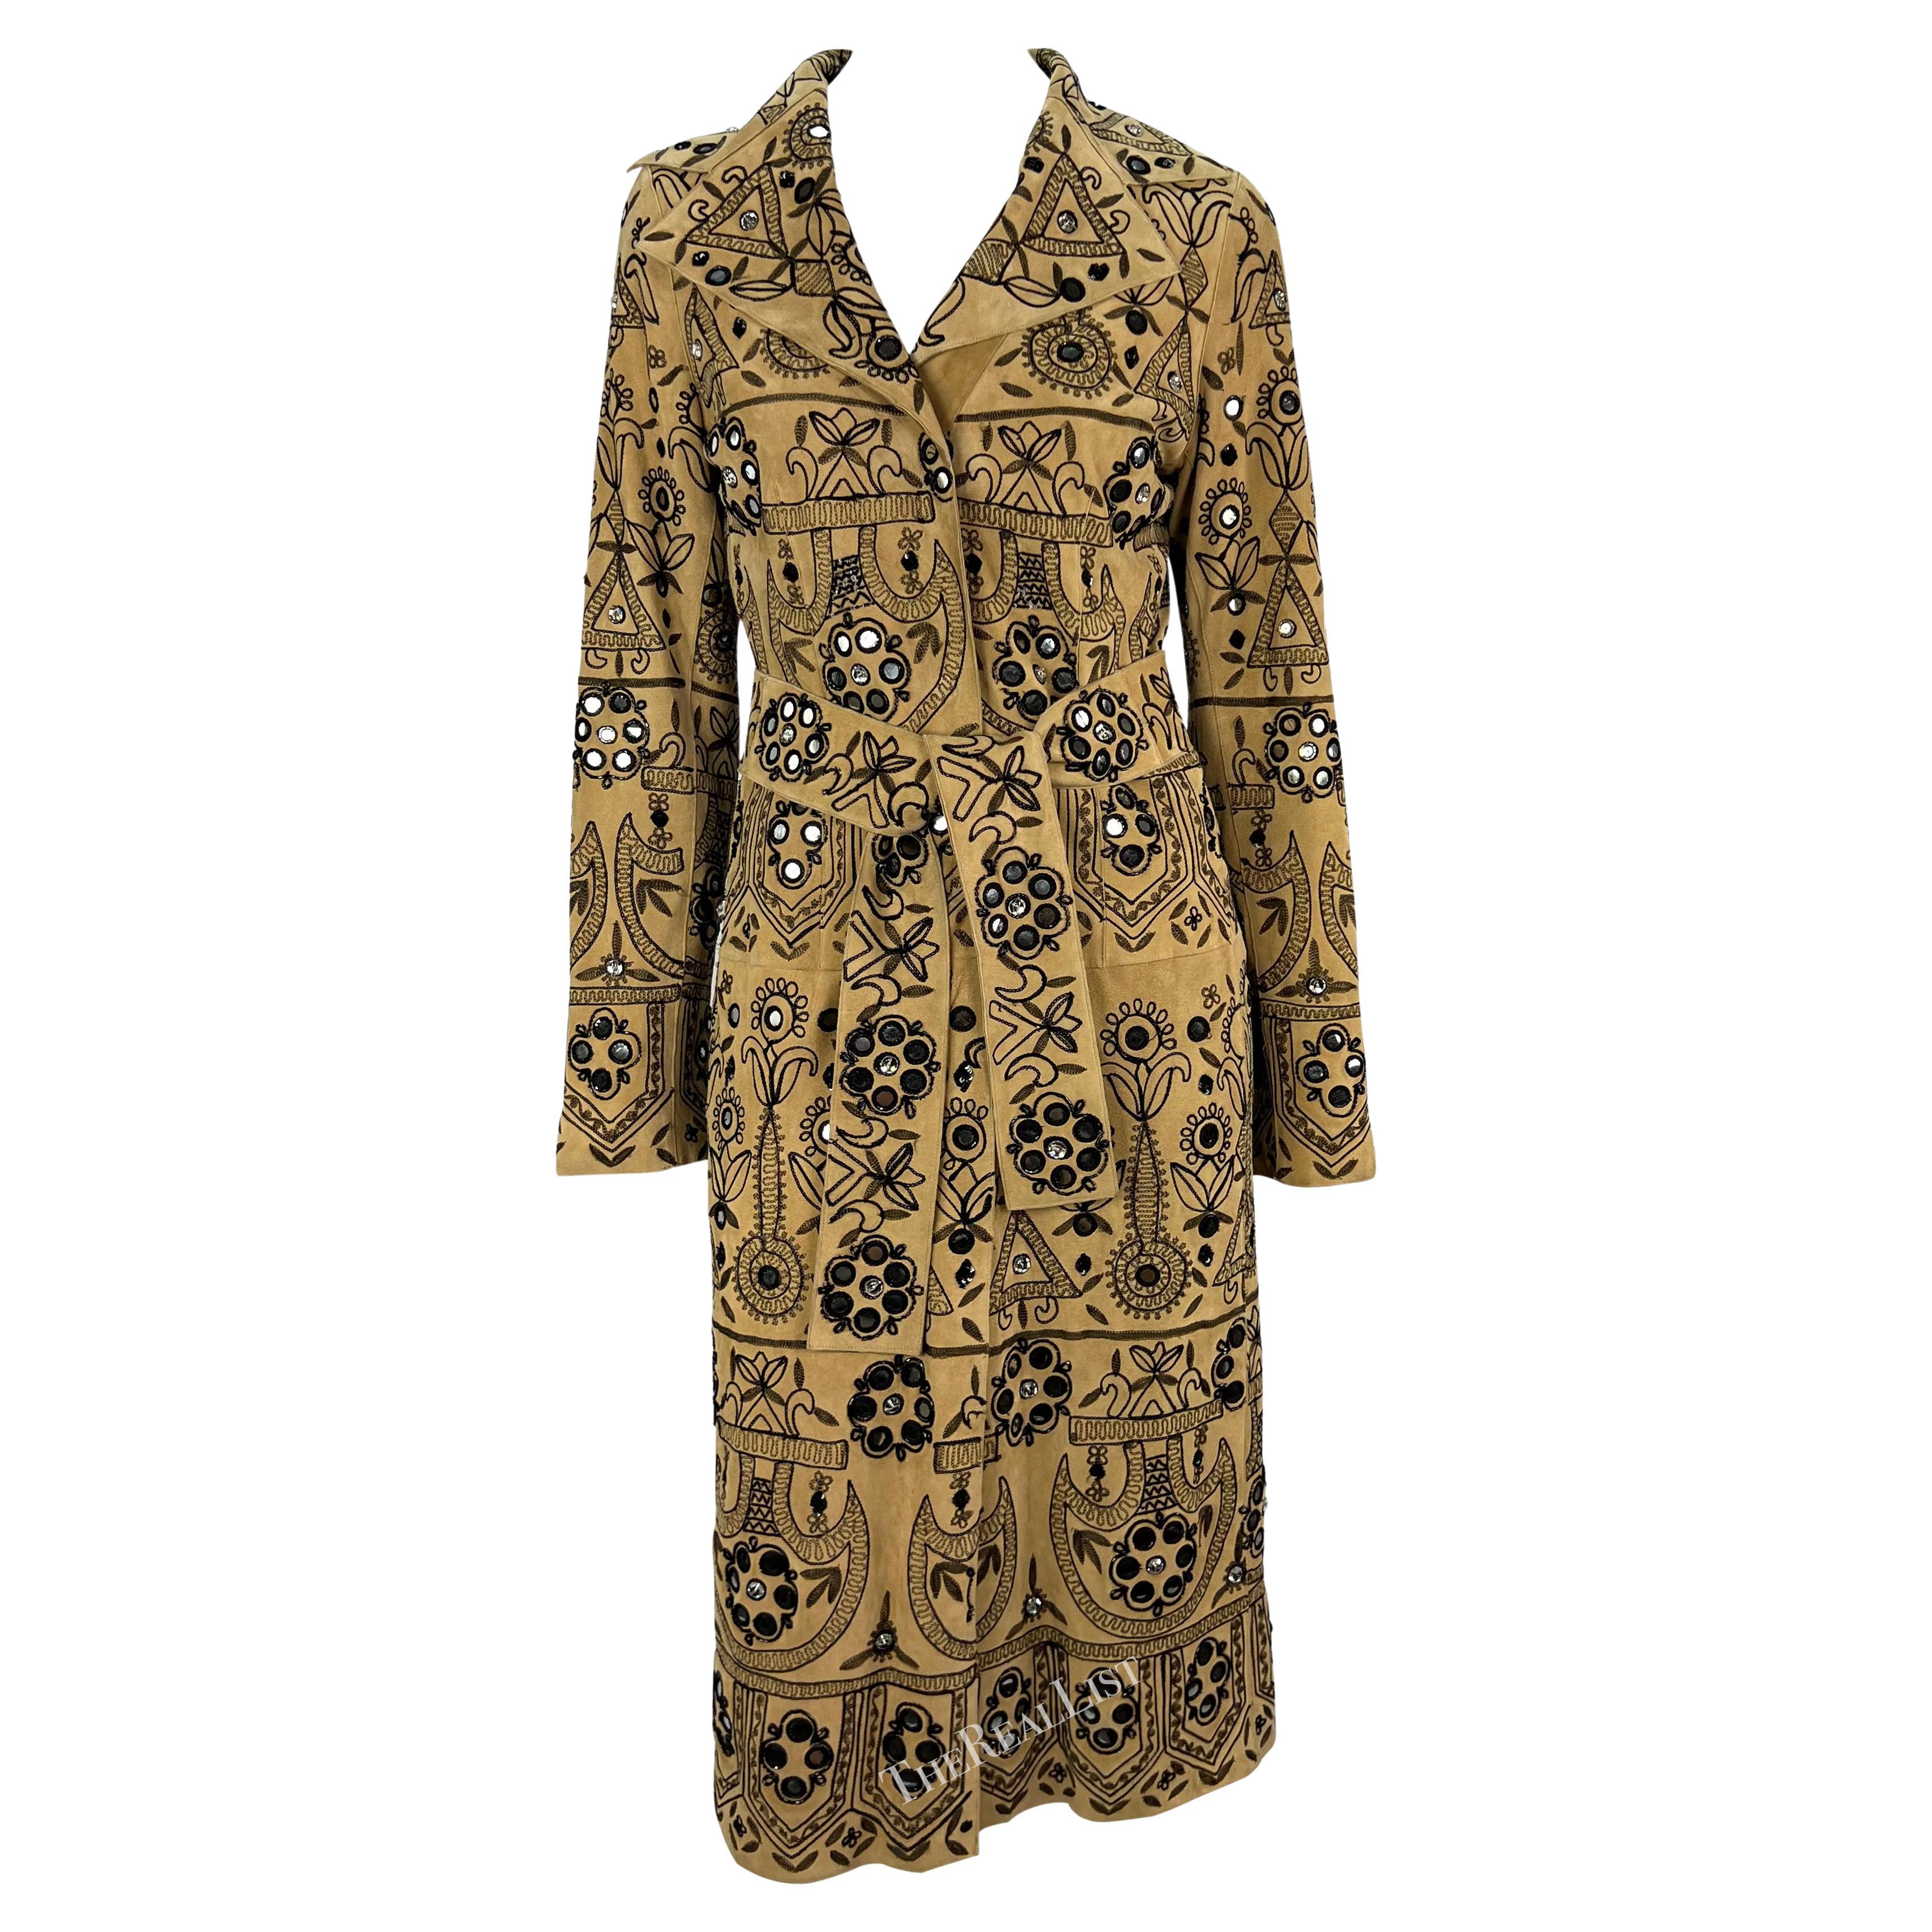 S/S 2001 Dolce & Gabbana Tan Suede Rhinestone Mirror Embroidered Trench Coat For Sale